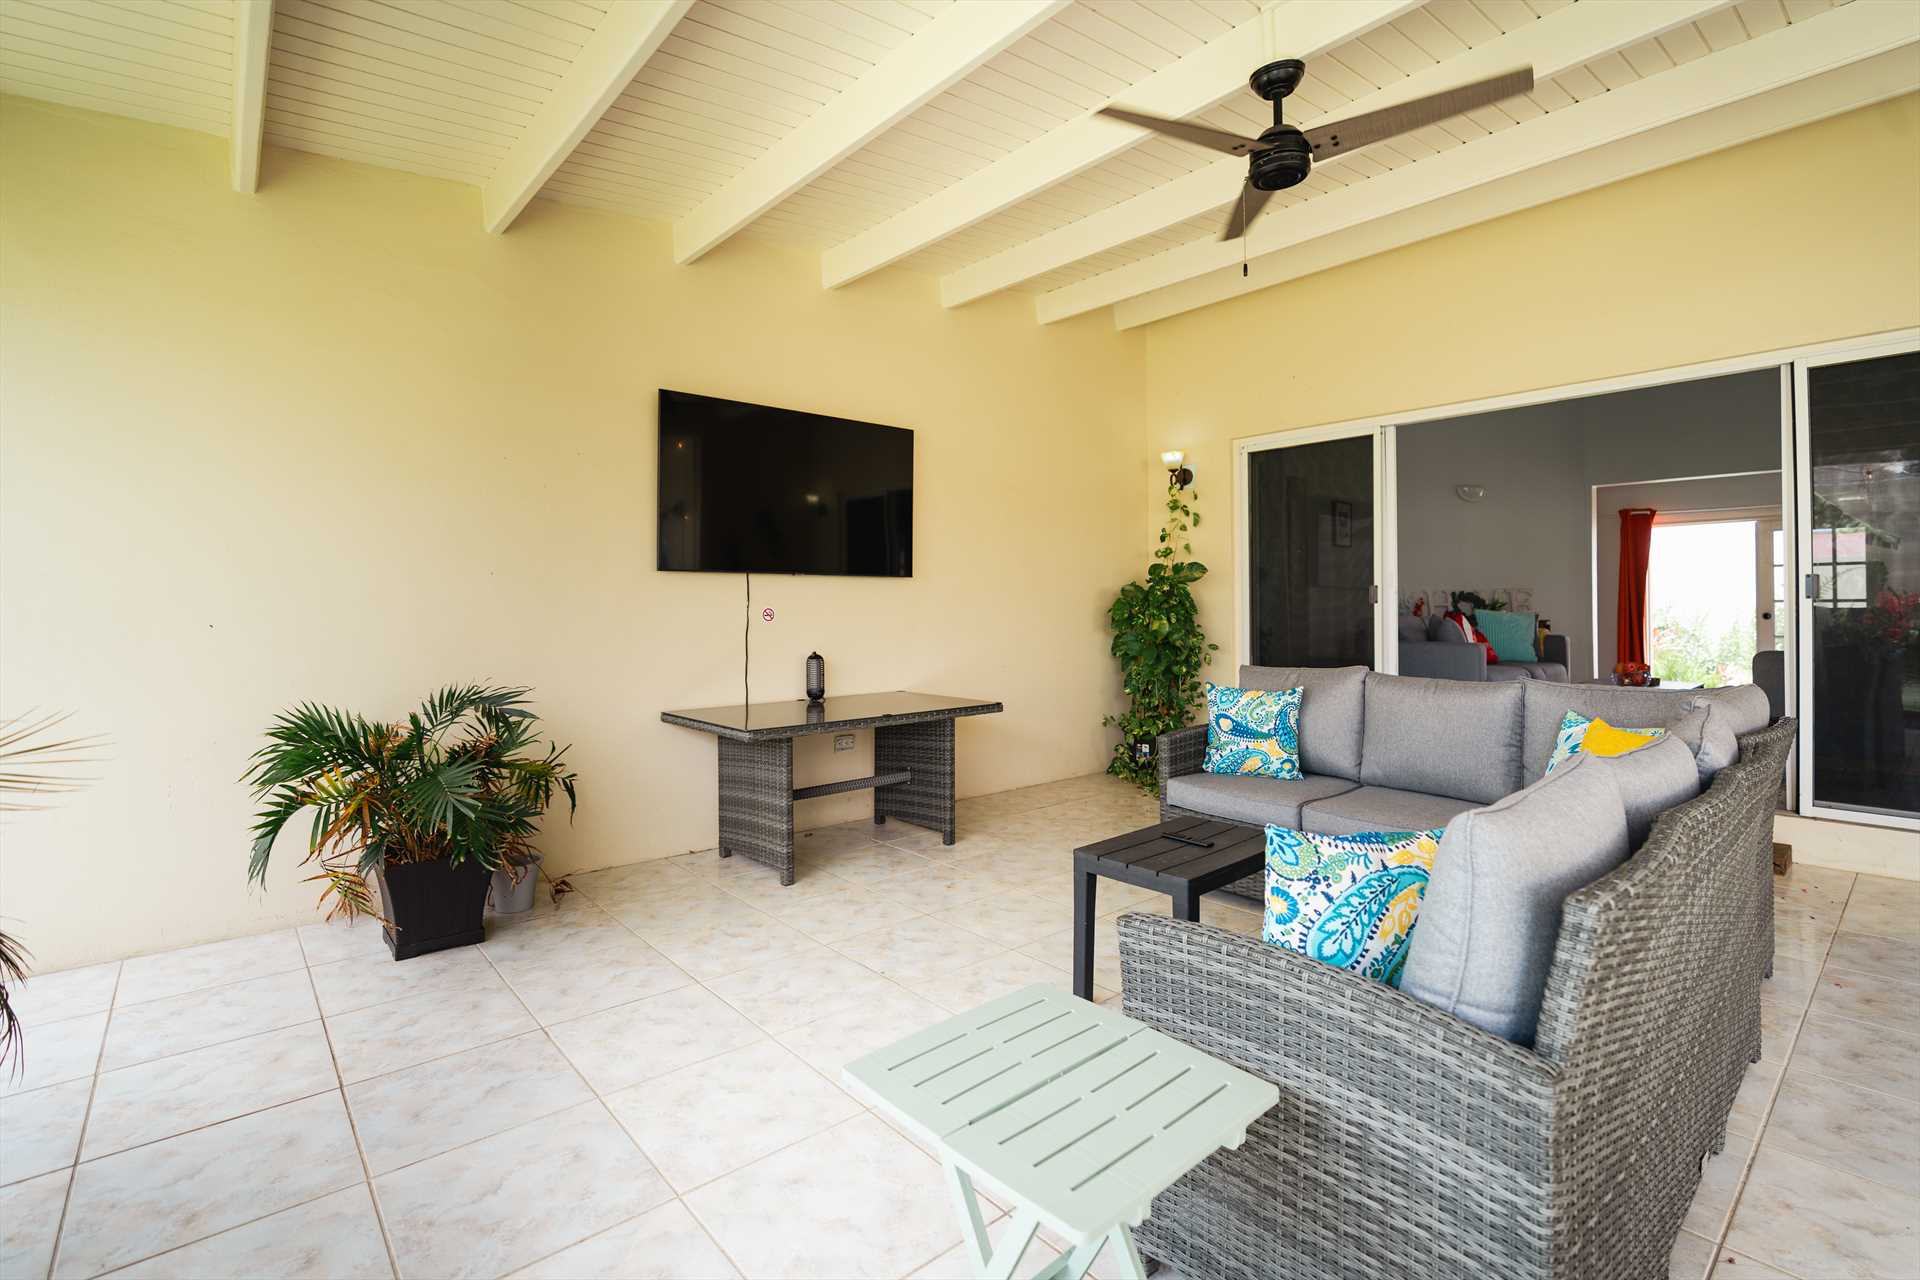 TV and seating area in the veranda